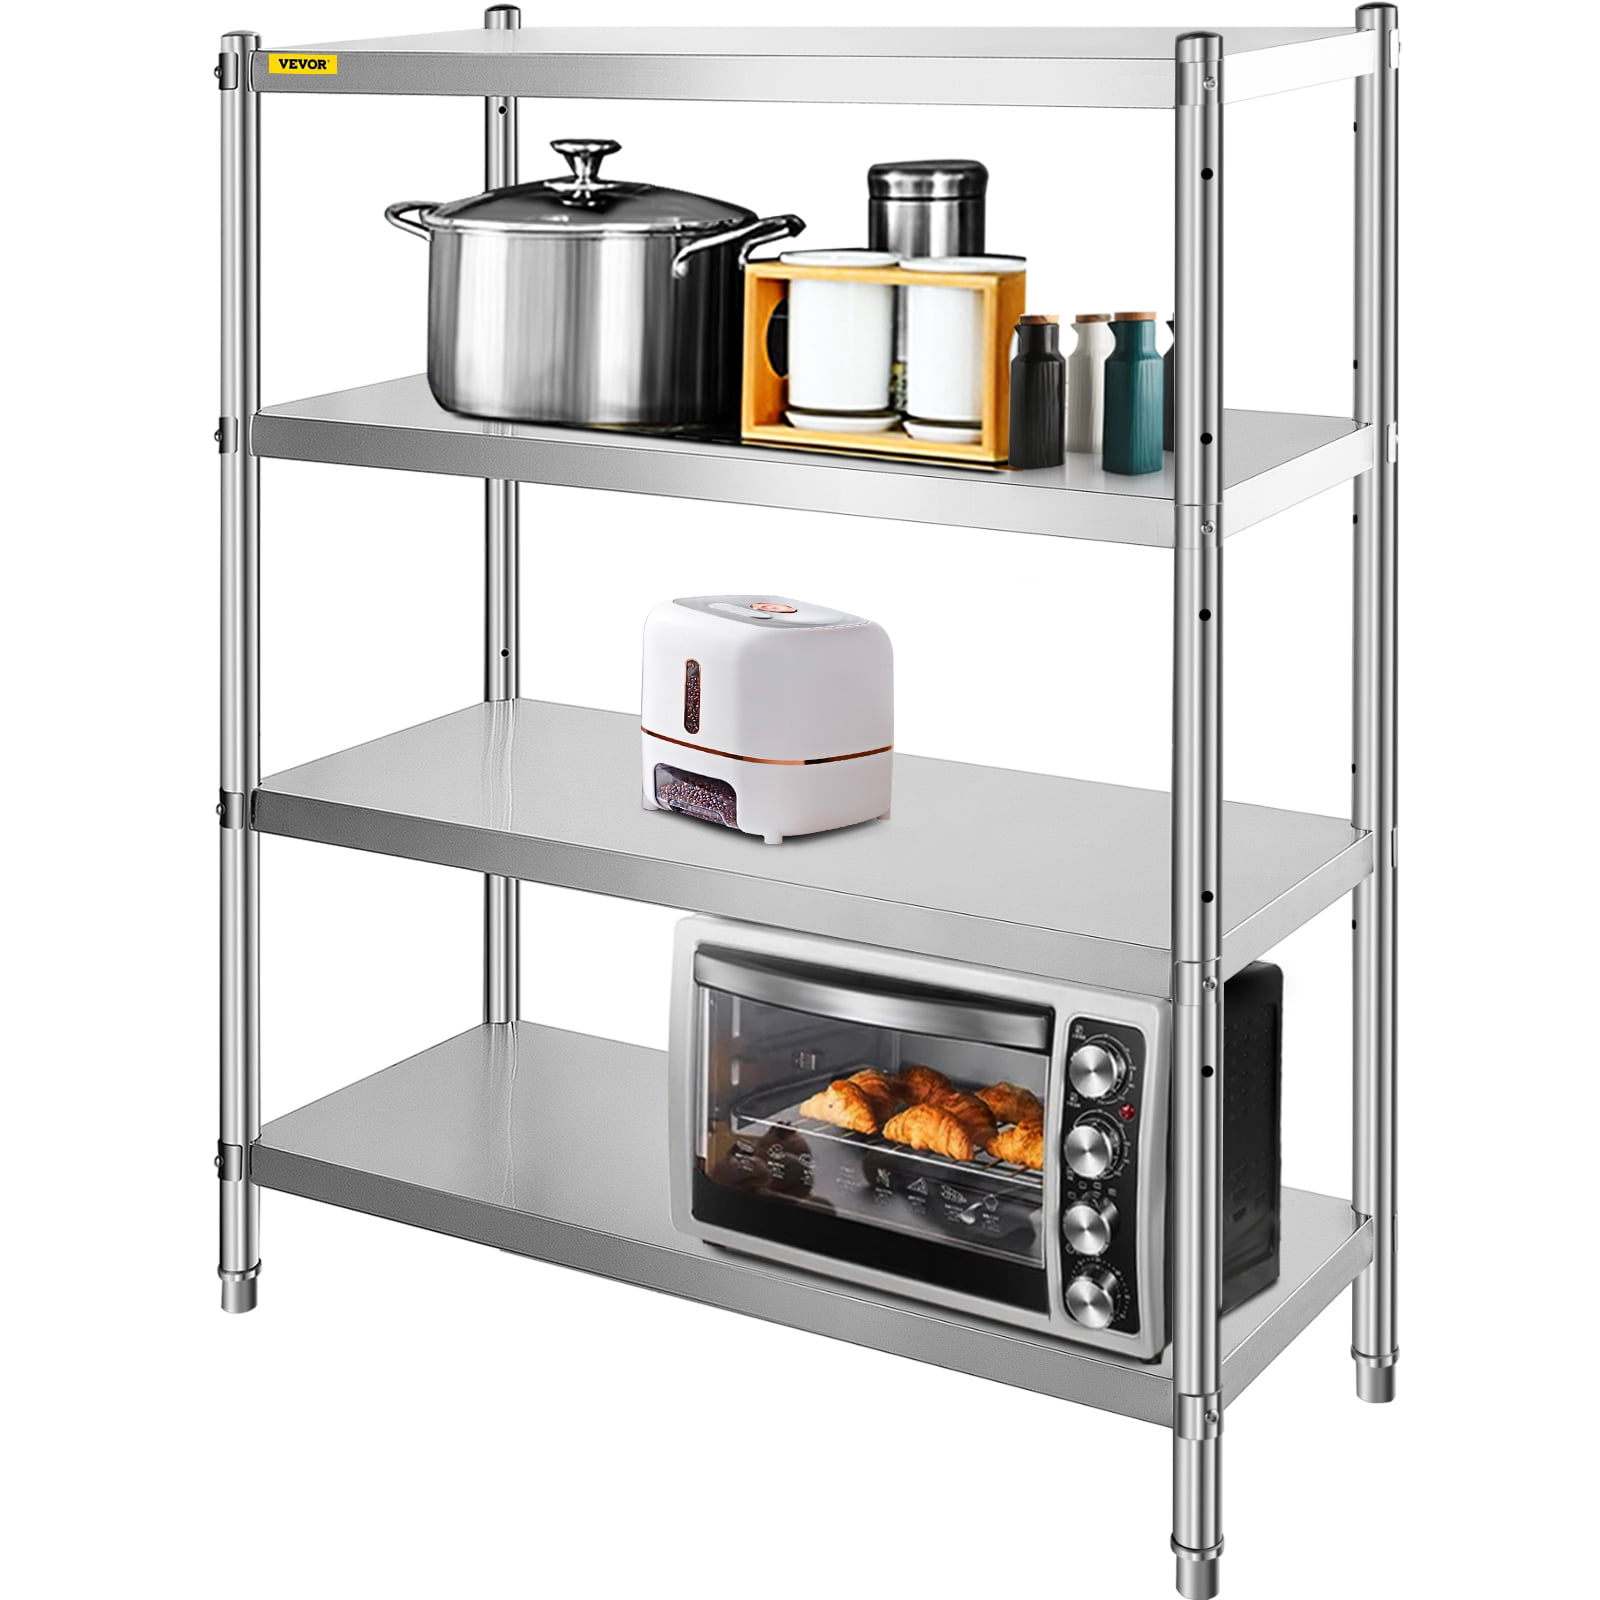 3/4 Tier Heavy Duty Stainless Steel Shelving Kitchen/Office Shelves Unit Stand 